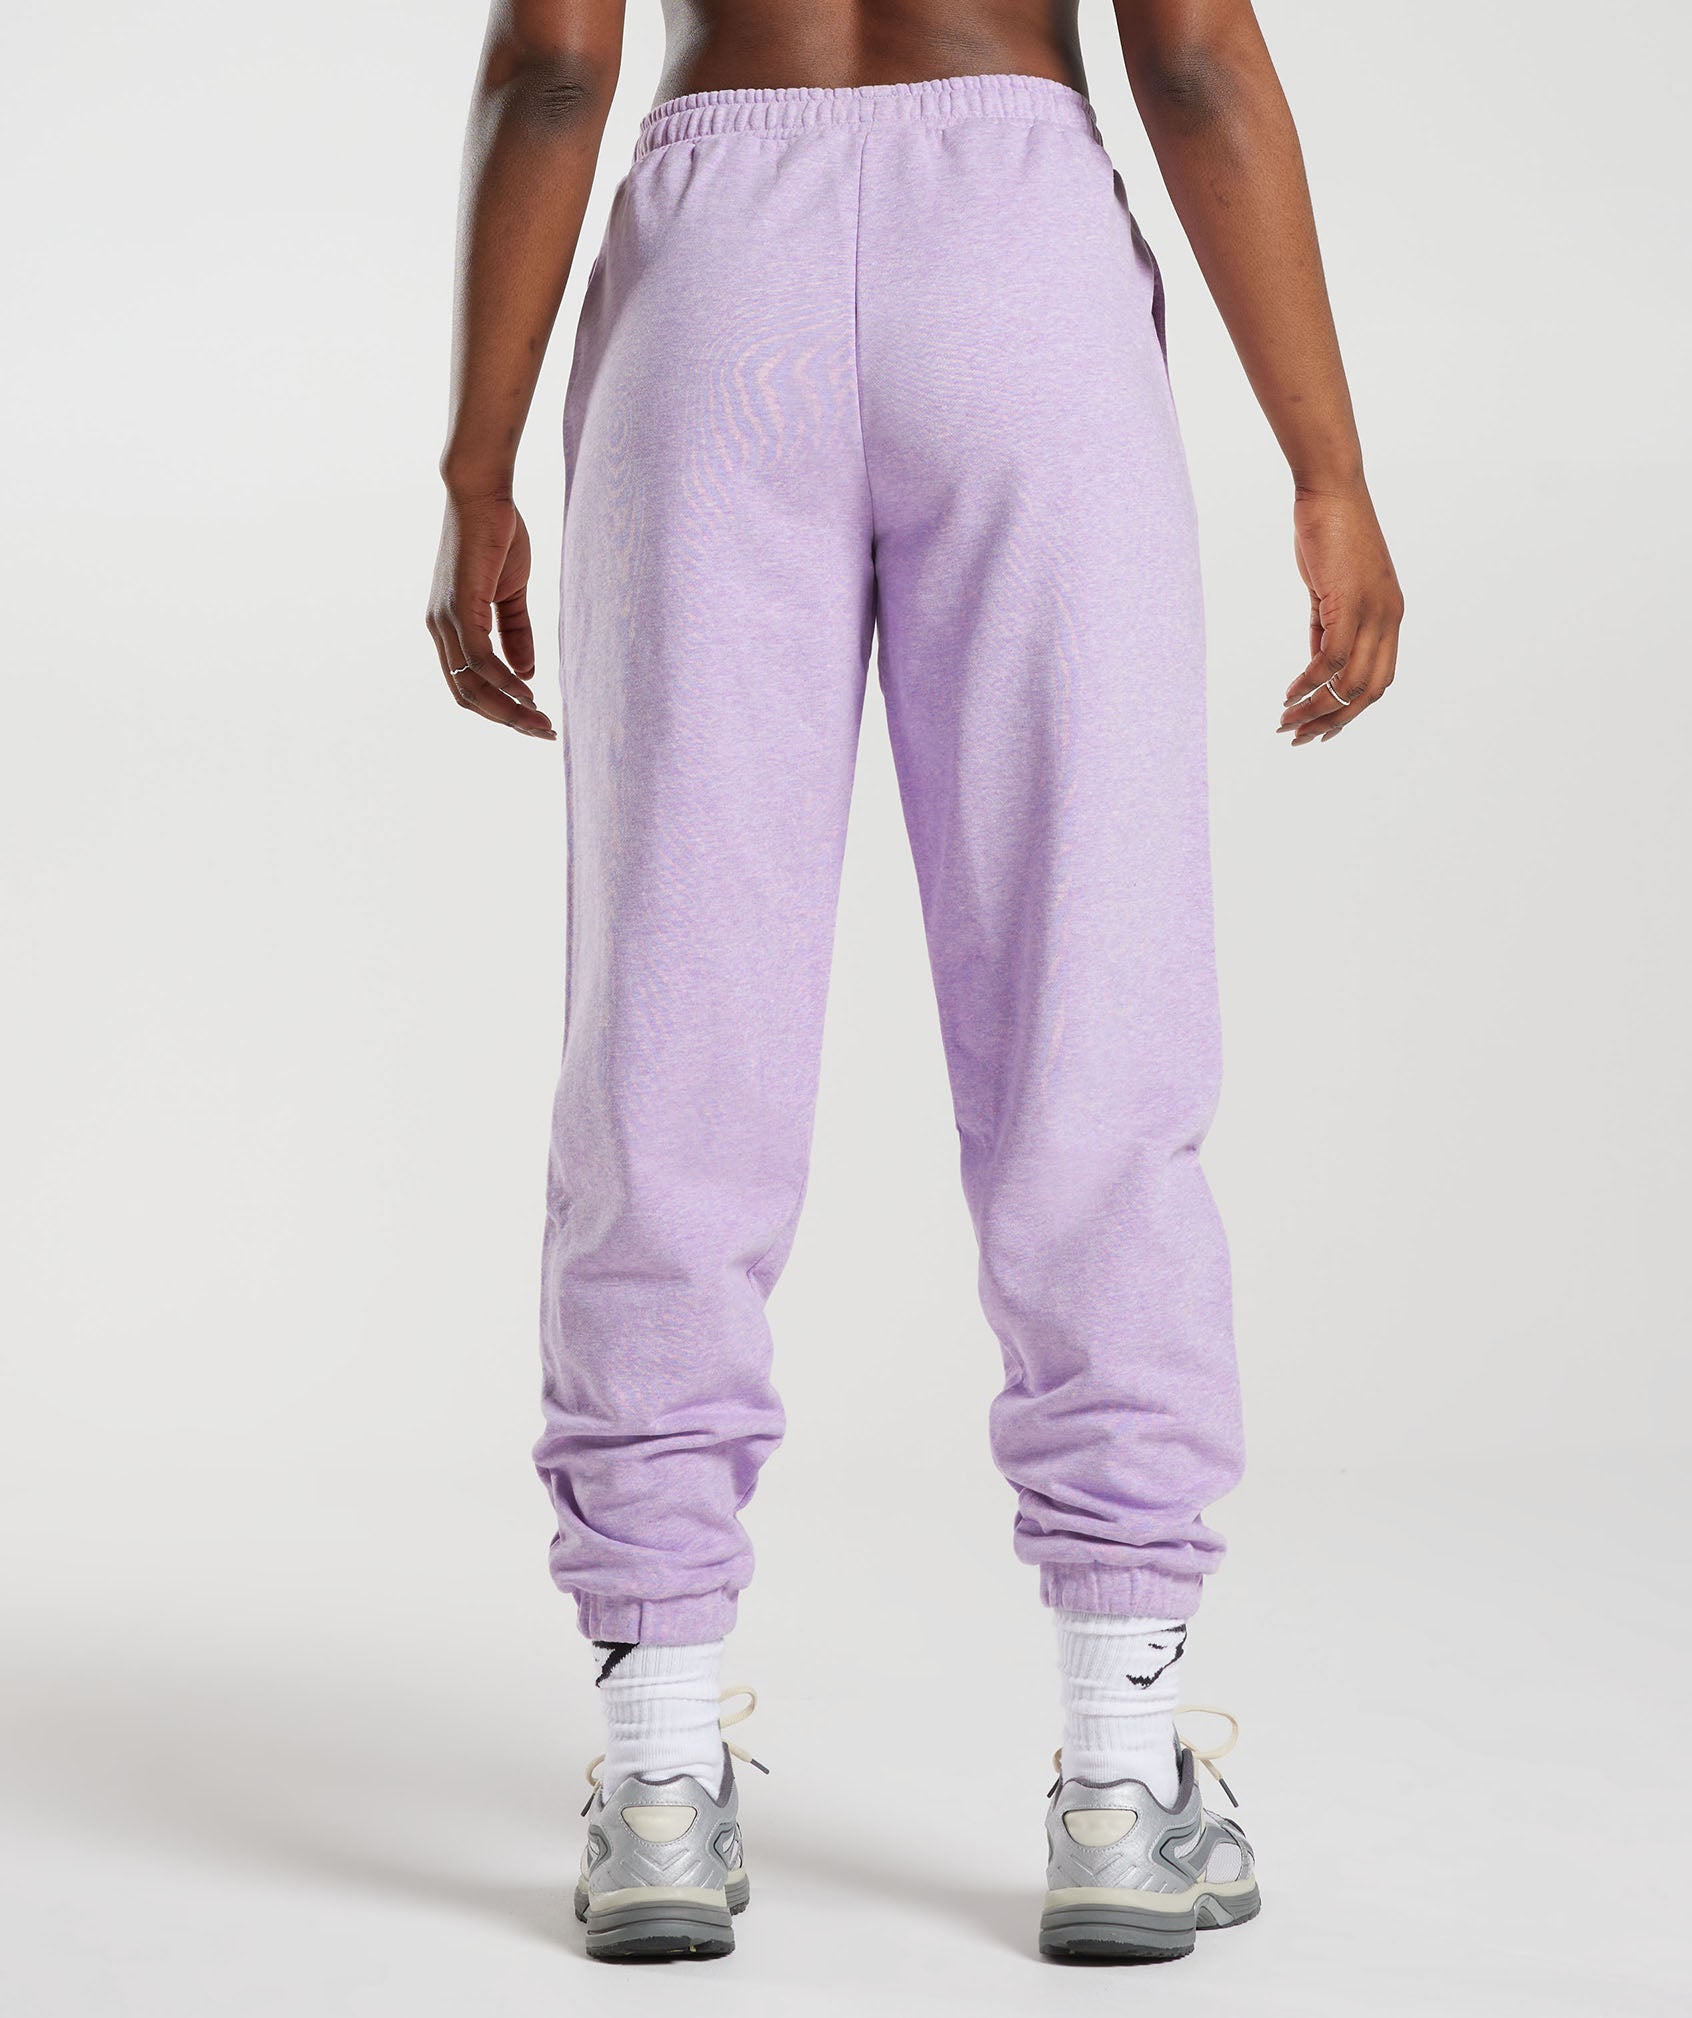 Rest Day Sweats Joggers in Aura Lilac Marl - view 2